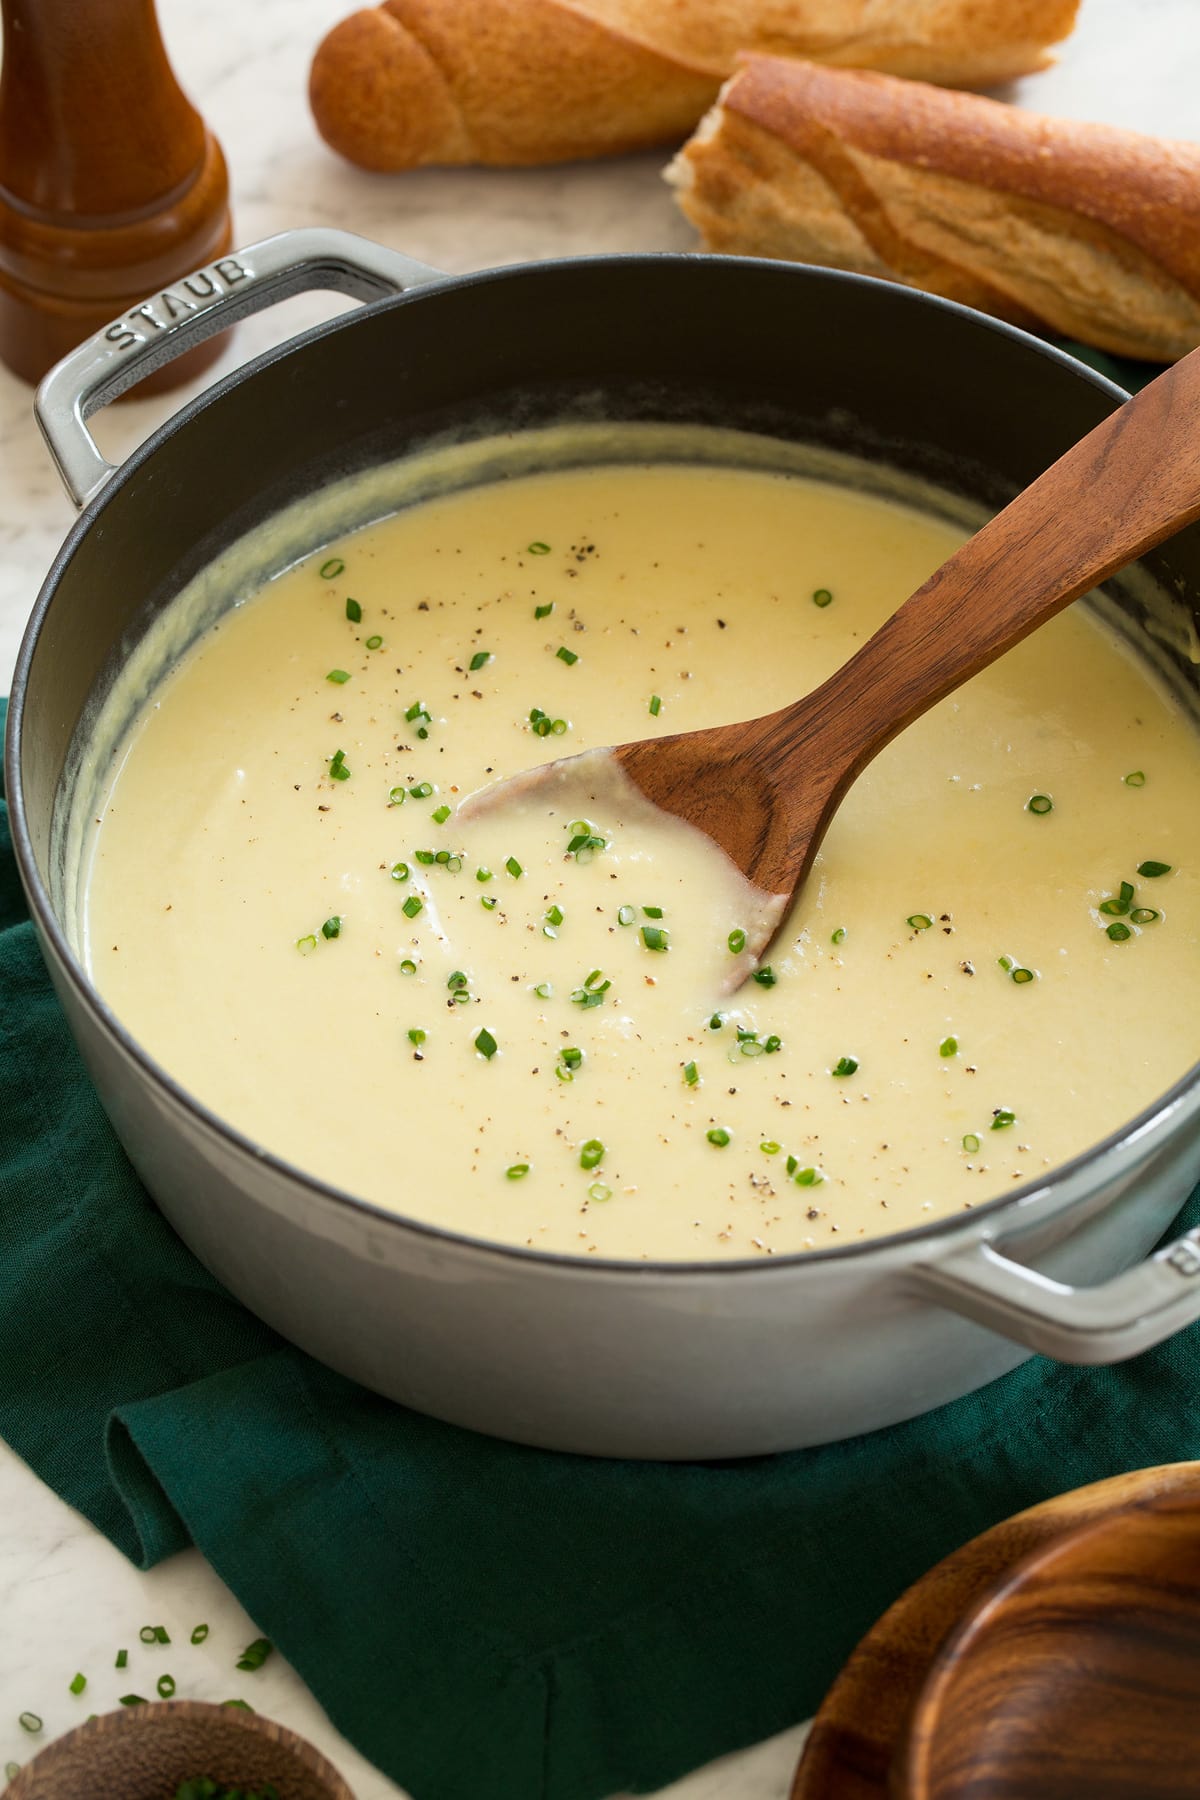 Pot with potato leek soup garnished with chives and a wooden ladle is scooping soup.